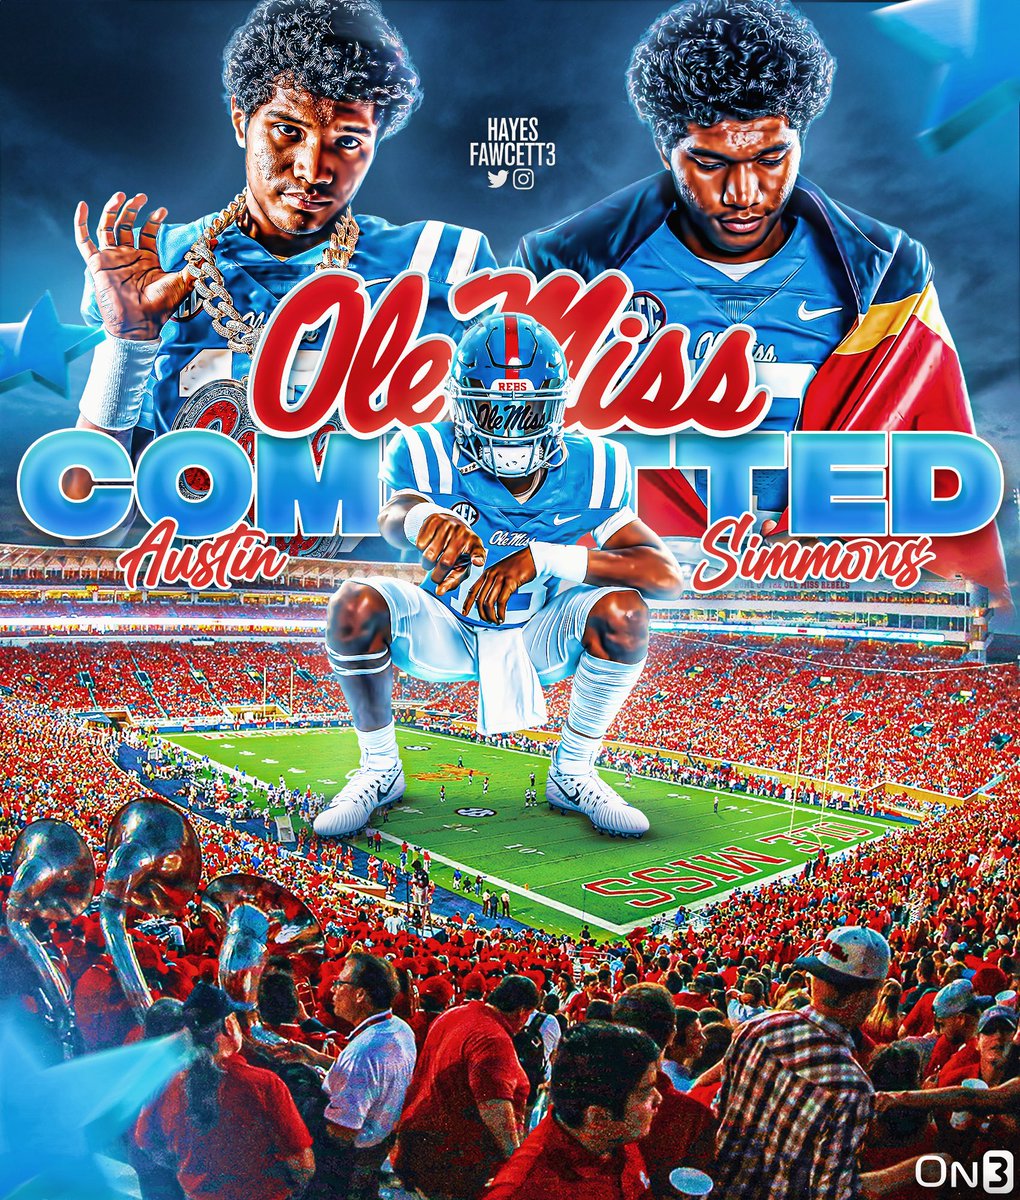 BREAKING: Four-Star QB Austin Simmons tells me he has Flipped his Commitment from Florida to Ole Miss!

The 2025 QB will reclassify to the 2023 Class & plans to enroll this summer 

Has a 5.34 GPA & finished HS classes as a freshman 

on3.com/college/ole-mi…